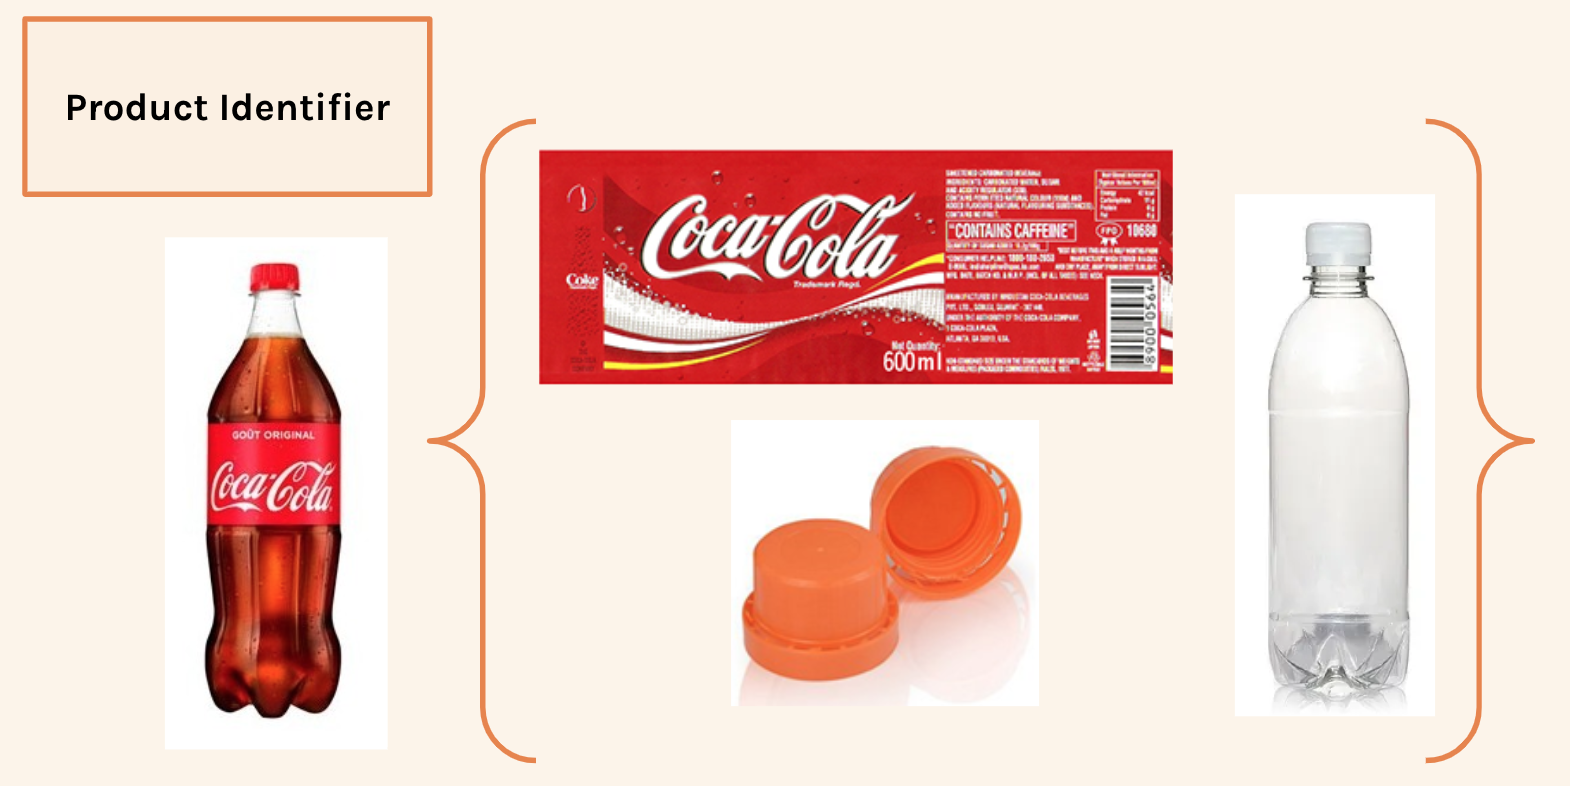 An image of a bottle of Coca Cola, made up of a bottle, label and lid, brought together with a unique 'product identifier'